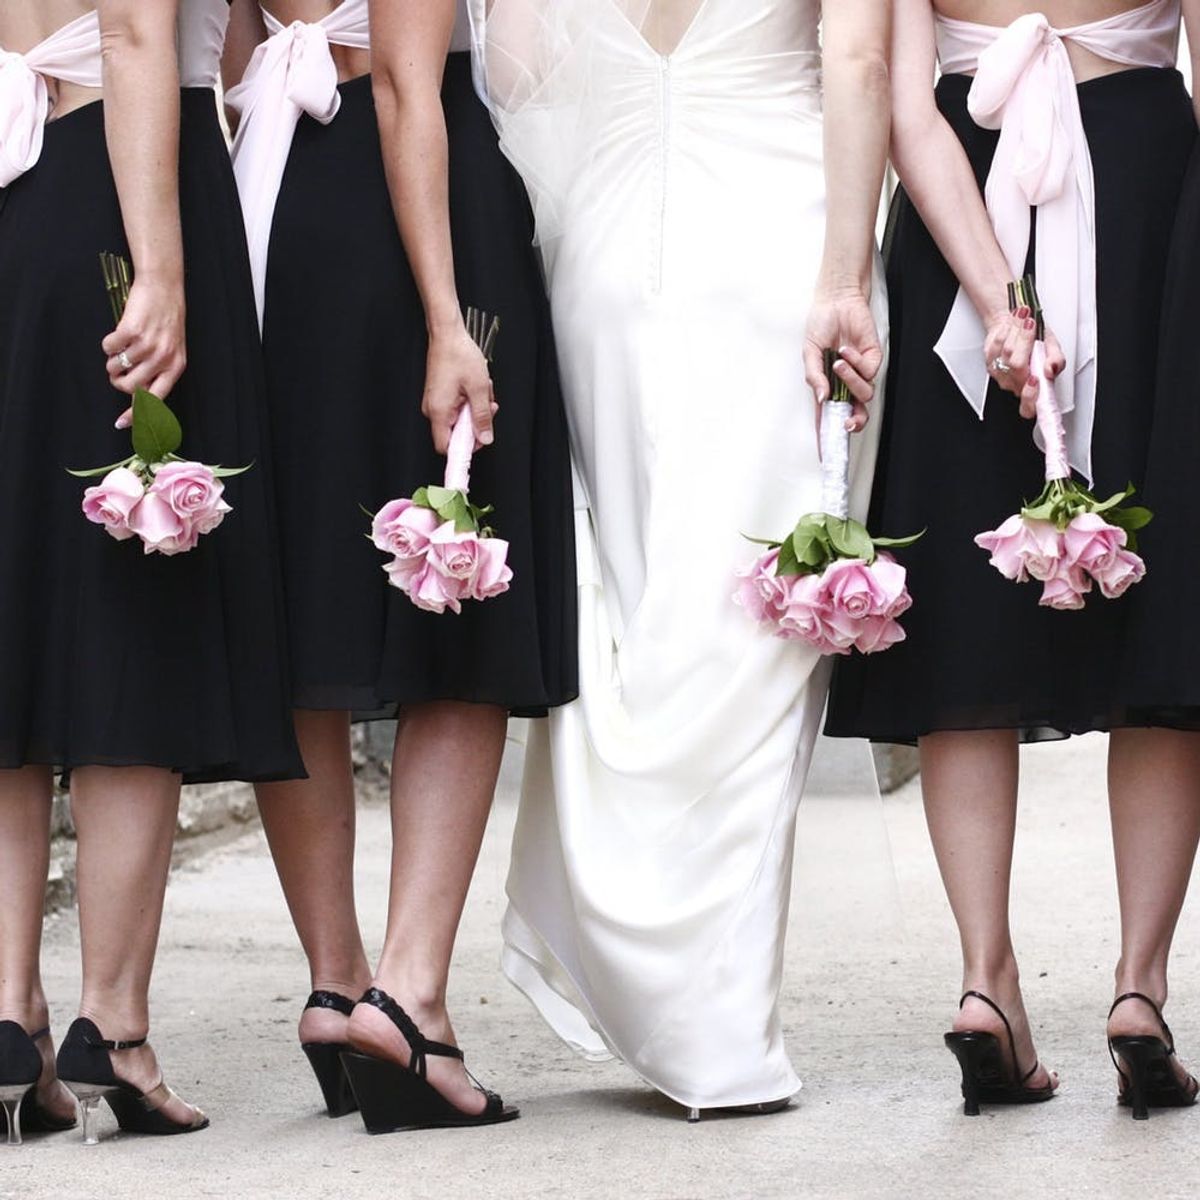 How to Say No to Being a Bridesmaid